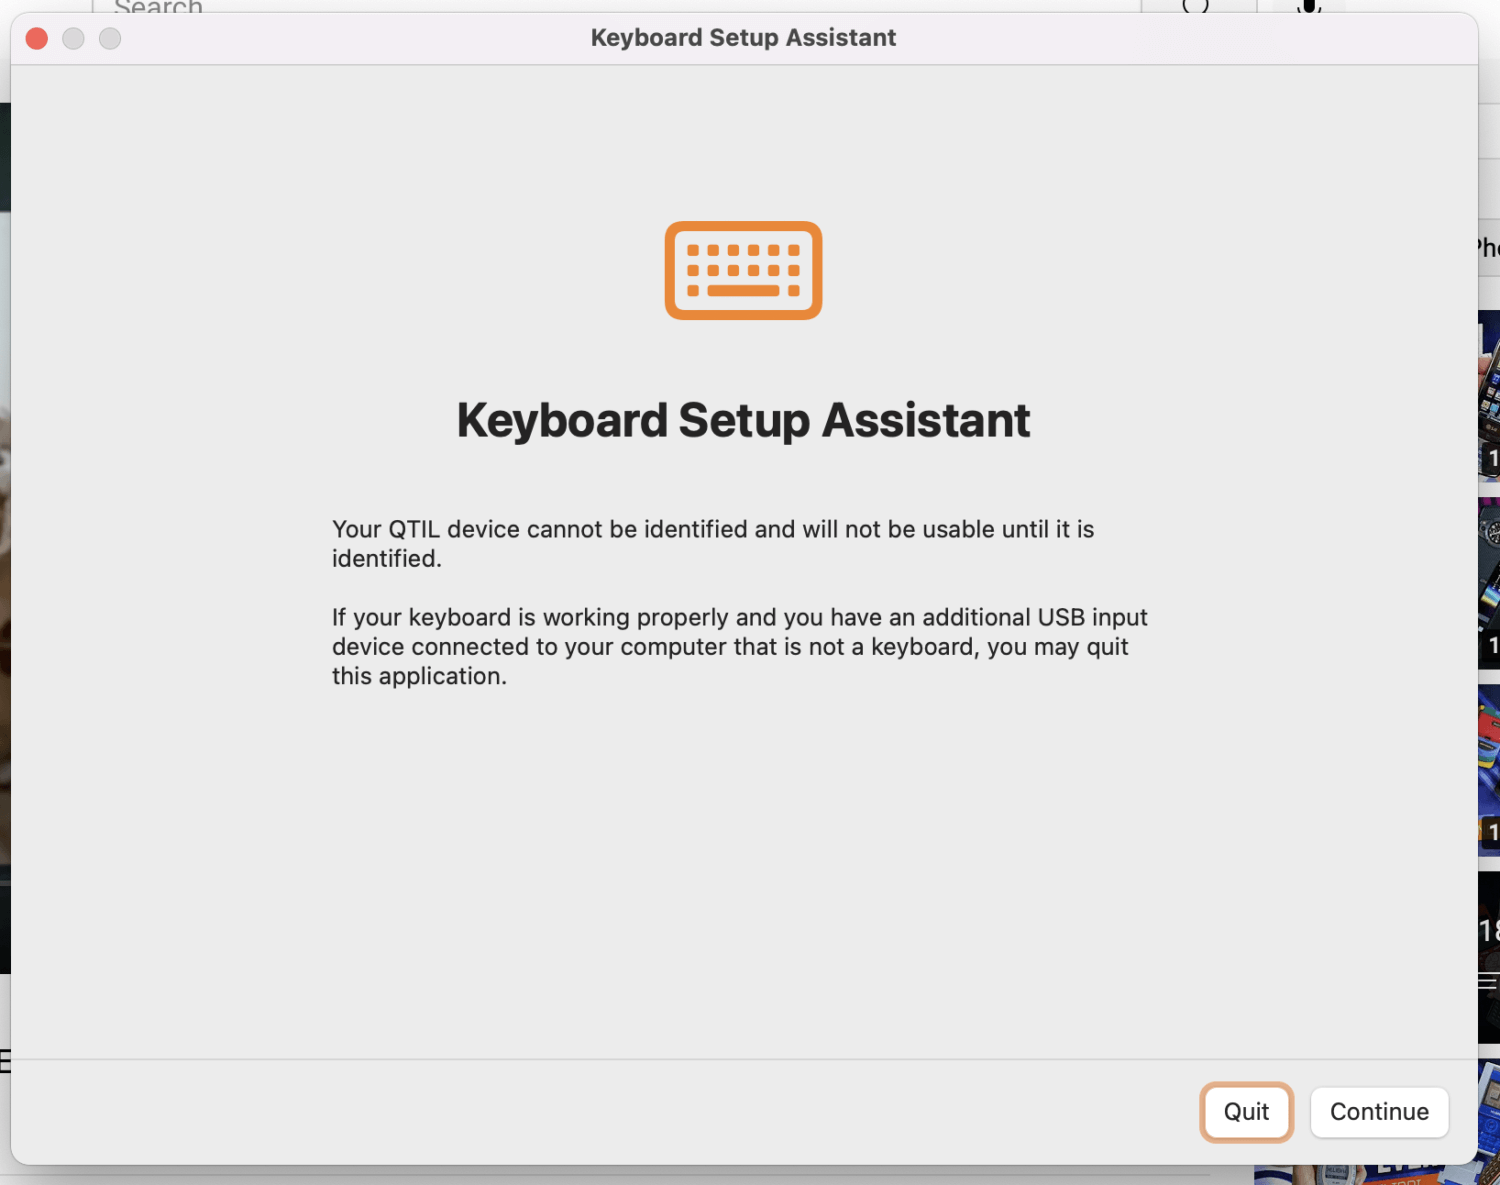 popup: "Keyboard Setup Assistant Your QTIL device cannot be identified and
will not be usable until it is identified. If your keyboard is working properly
and you have an additional USB input device connected to your computer that is
not a keyboard, you may quit this application."